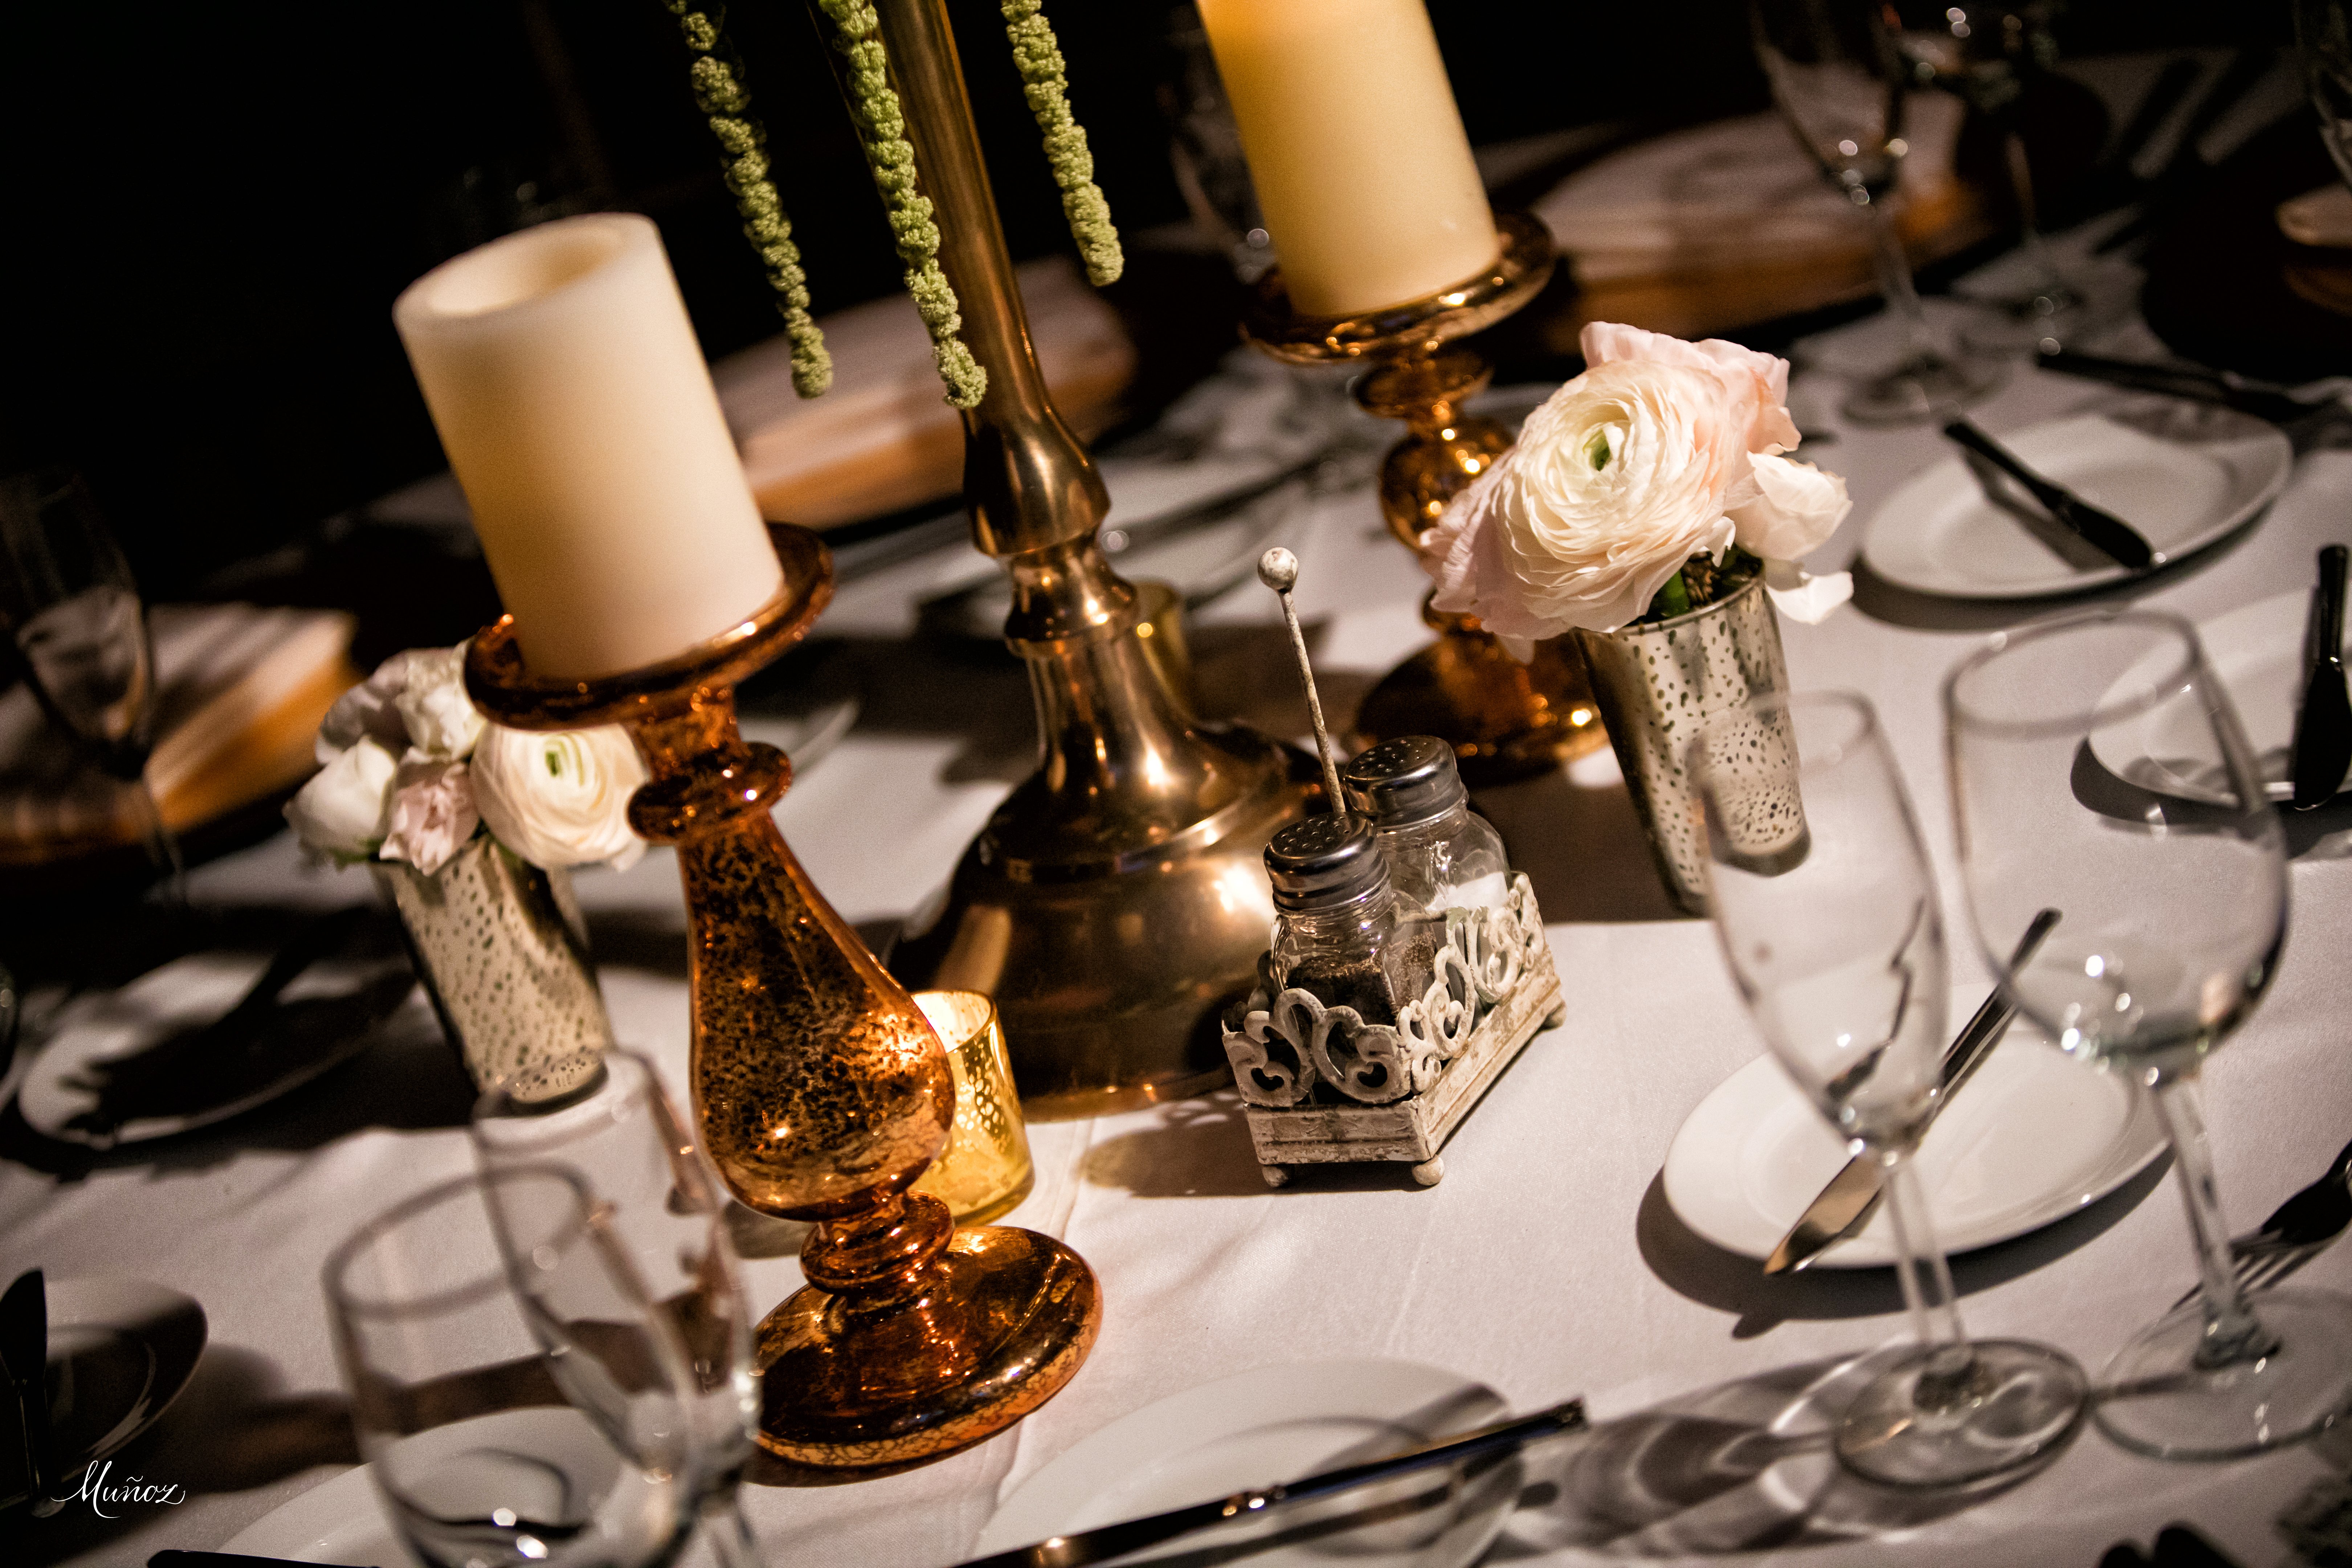 Sumptuous old world table decor at Ancient Spanish Monastery wedding